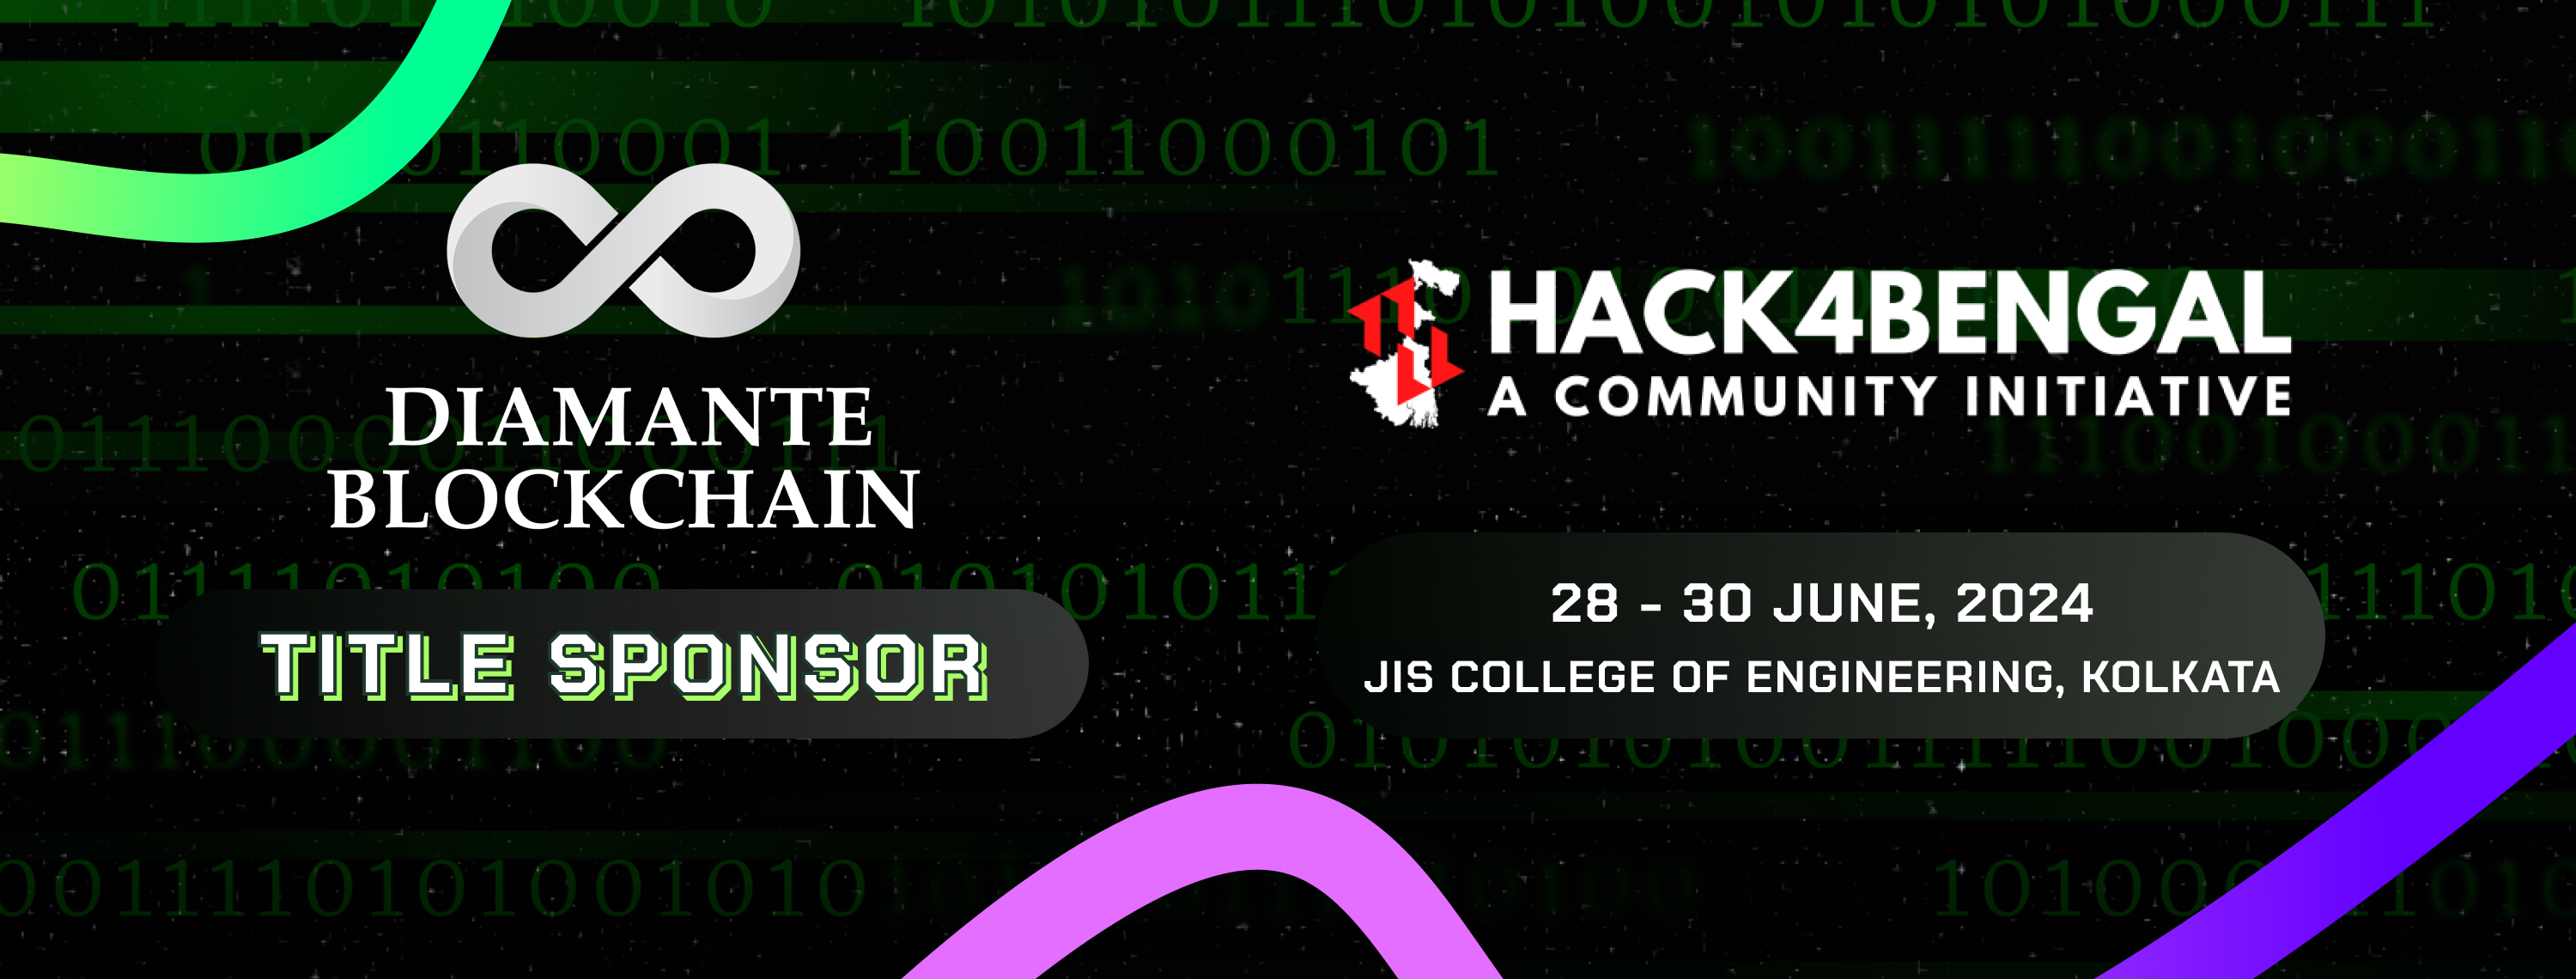 Banner announcing Diamante Blockchain as the title sponsor for Hack4Bengal 2024, a major hackathon taking place from June 28-30, 2024 at JIS College of Engineering, Kolkata. The banner features the Diamante Blockchain logo alongside the Hack4Bengal logo, with binary code in the background.